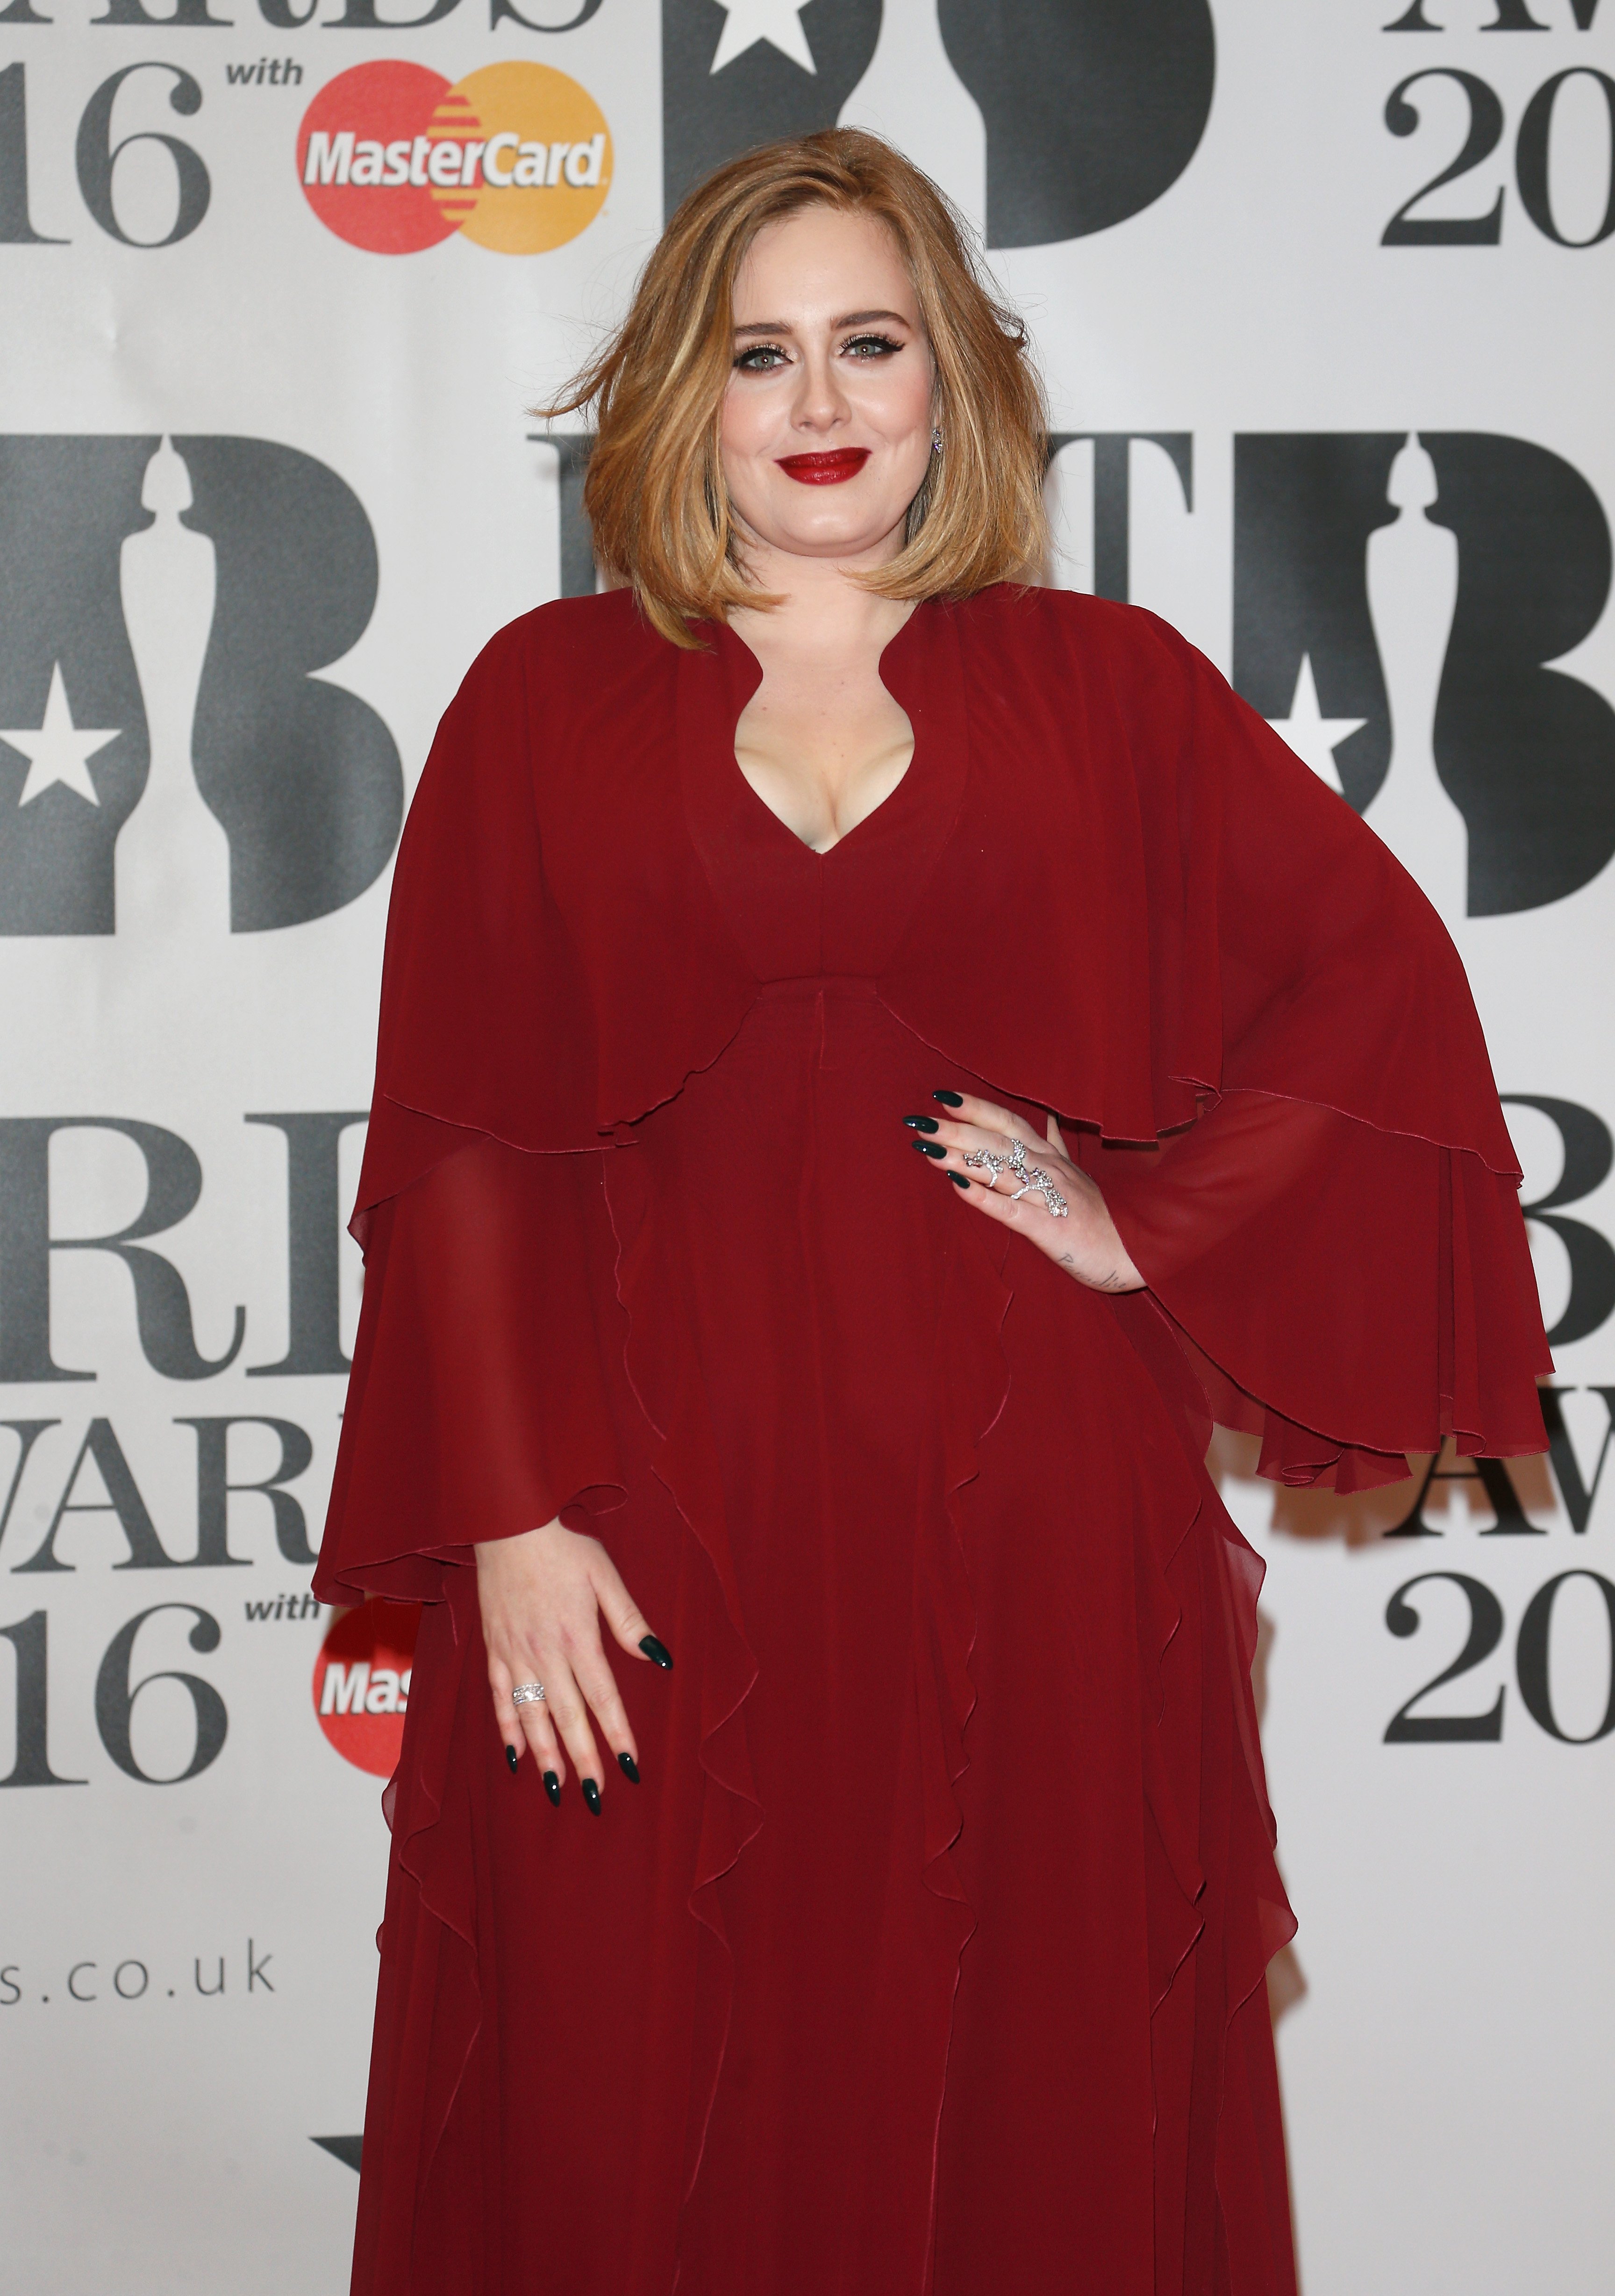 Adele attends the BRIT Awards 2016 at The O2 Arena on February 24, 2016 in London, England. | Photo: Getty Images